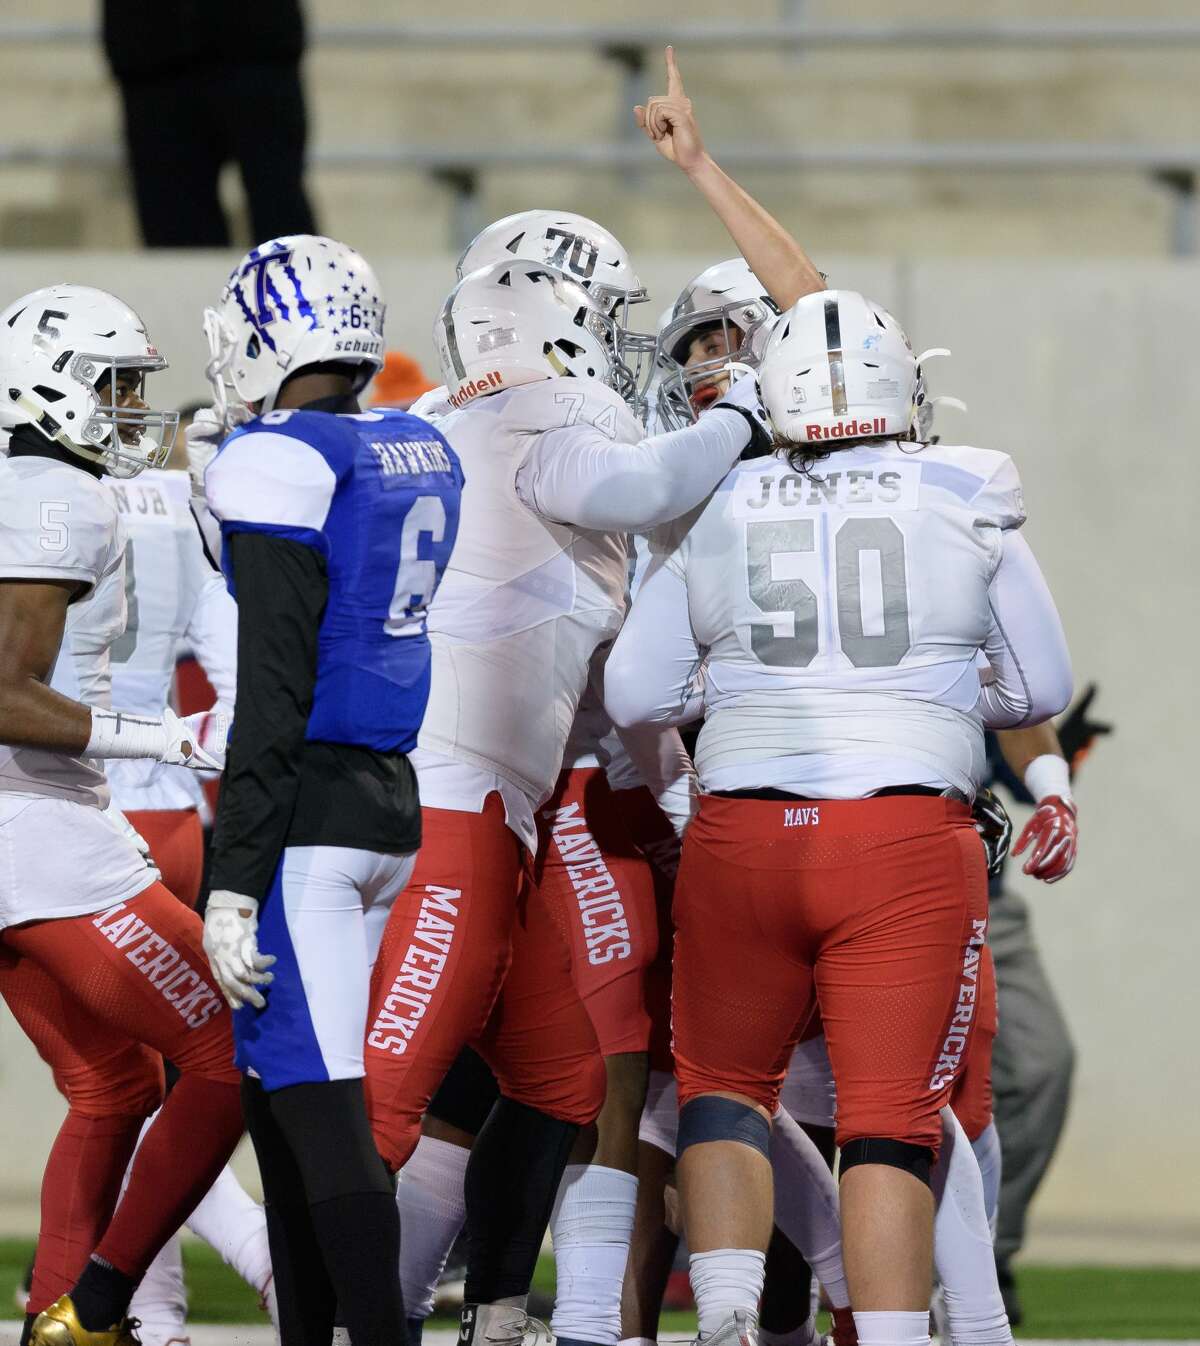 Kason Martin (12) of the Manvel Mavericks celebrates his touchdown in the second half with Lance Jones (50), Steven Shaw (70), and Jalen Momerelle (74) in a game against the Temple Wildcats in a high school football game on Friday, December 8, 2017 at Blackshear Field at Prairie View A&M University.